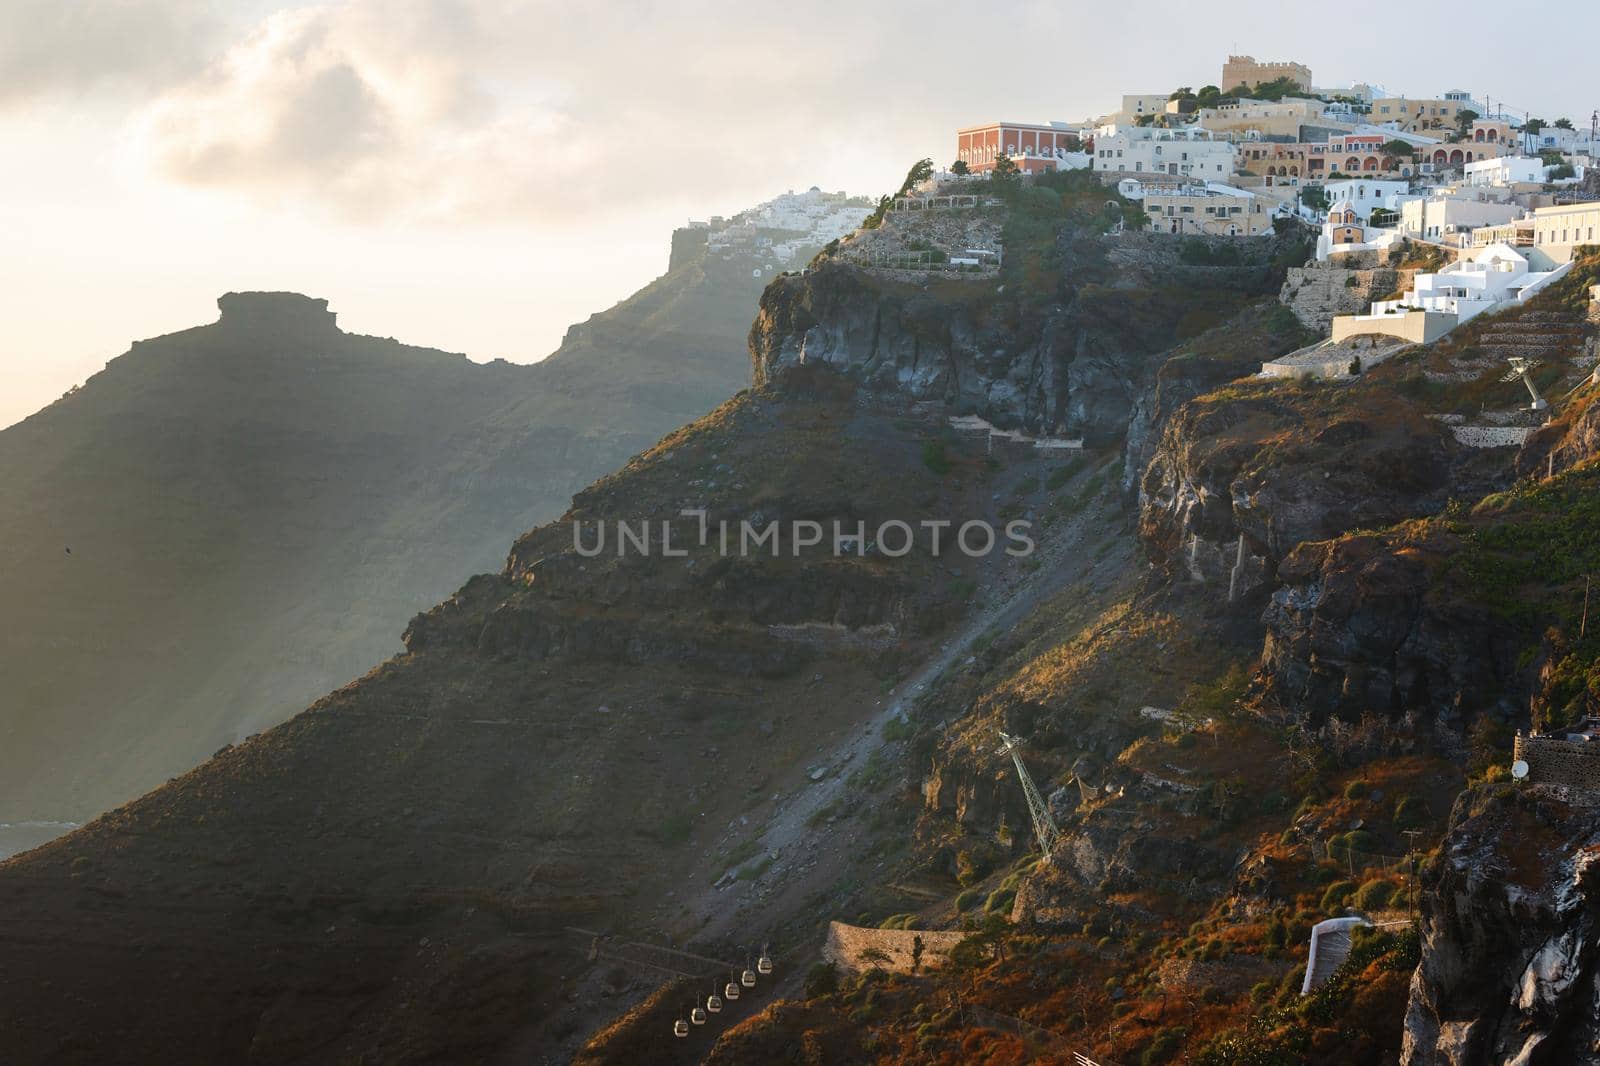 Sunset on the Greek Island of Santorini,with colorful  warm light and clouds over the town. The view follows the edge of the caldera from Thira, Skaros rock,  Imerovigli and Oia towards the sun